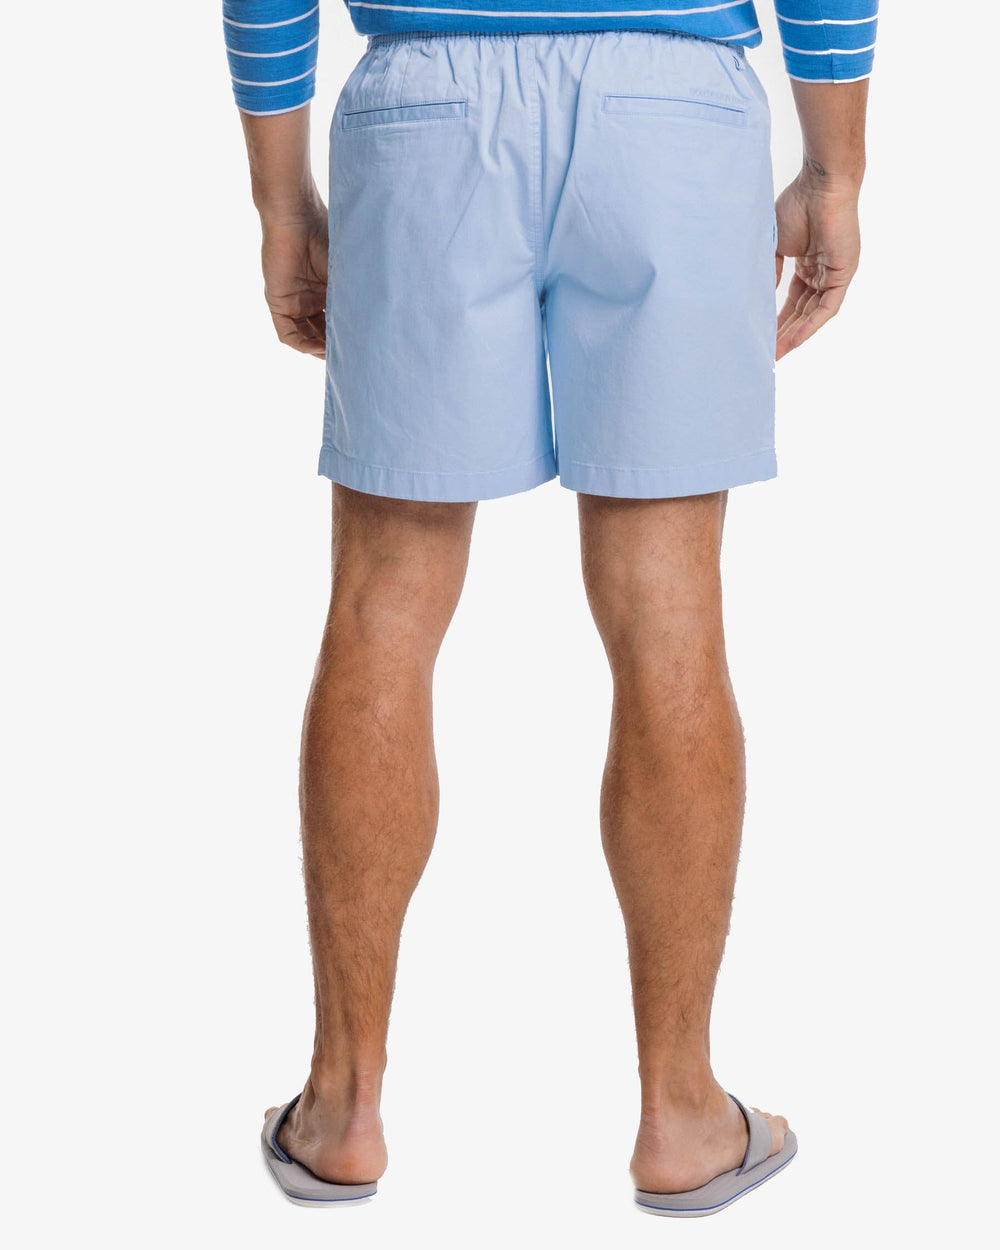 The back view of the Southern Tide Sun Farer 6 Inch Short by Southern Tide - Clearwater Blue